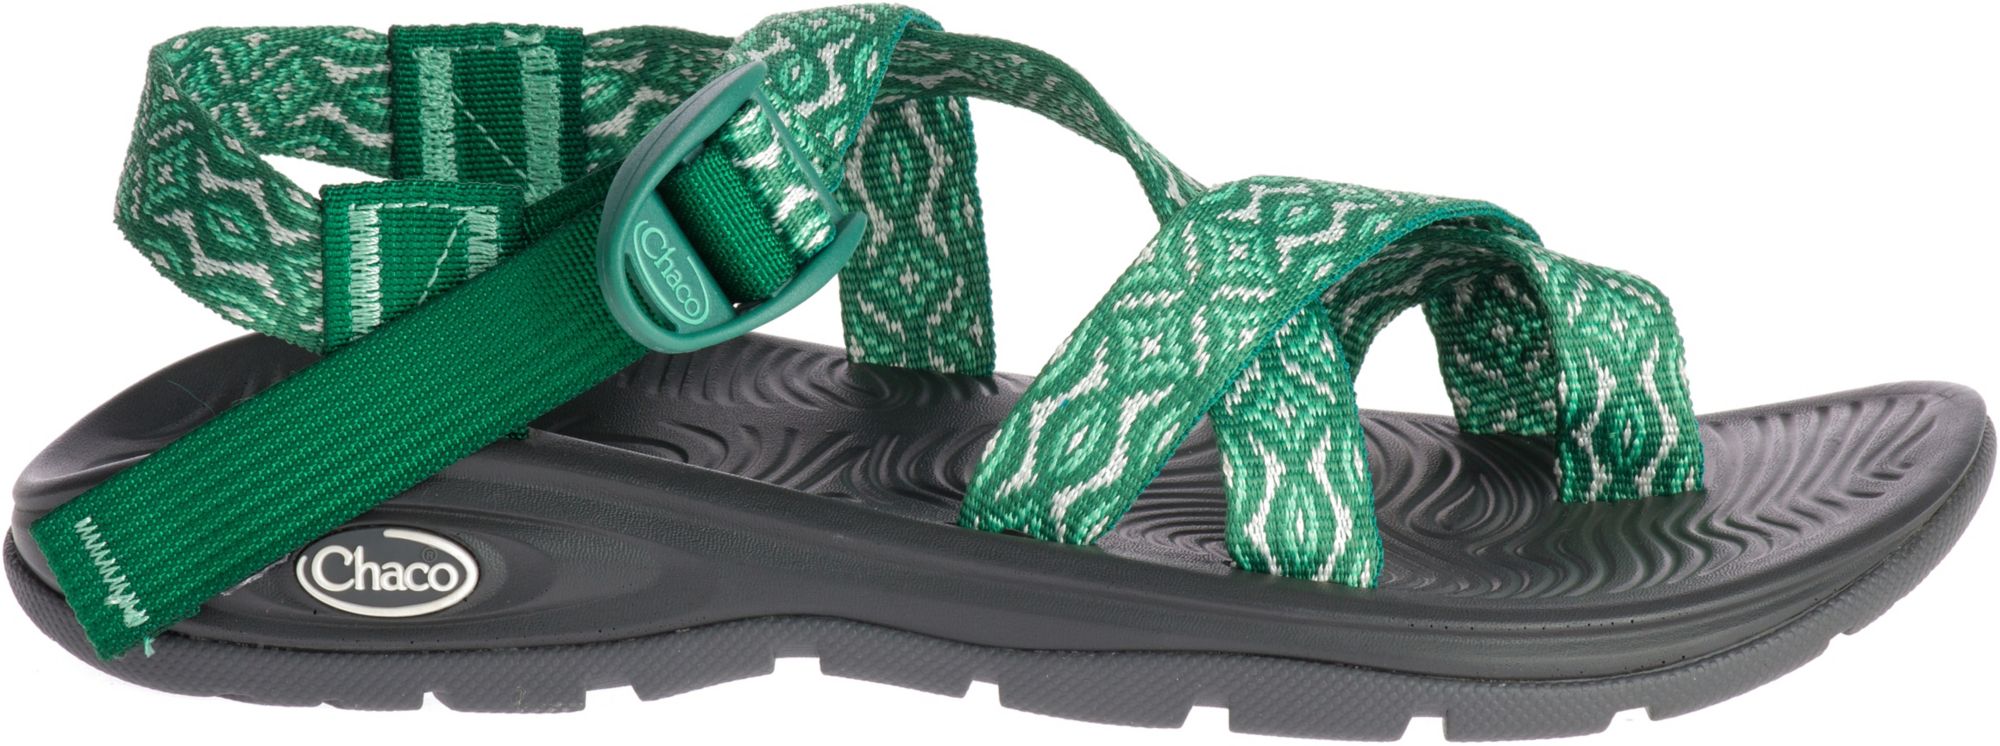 outdoor sandals chaco